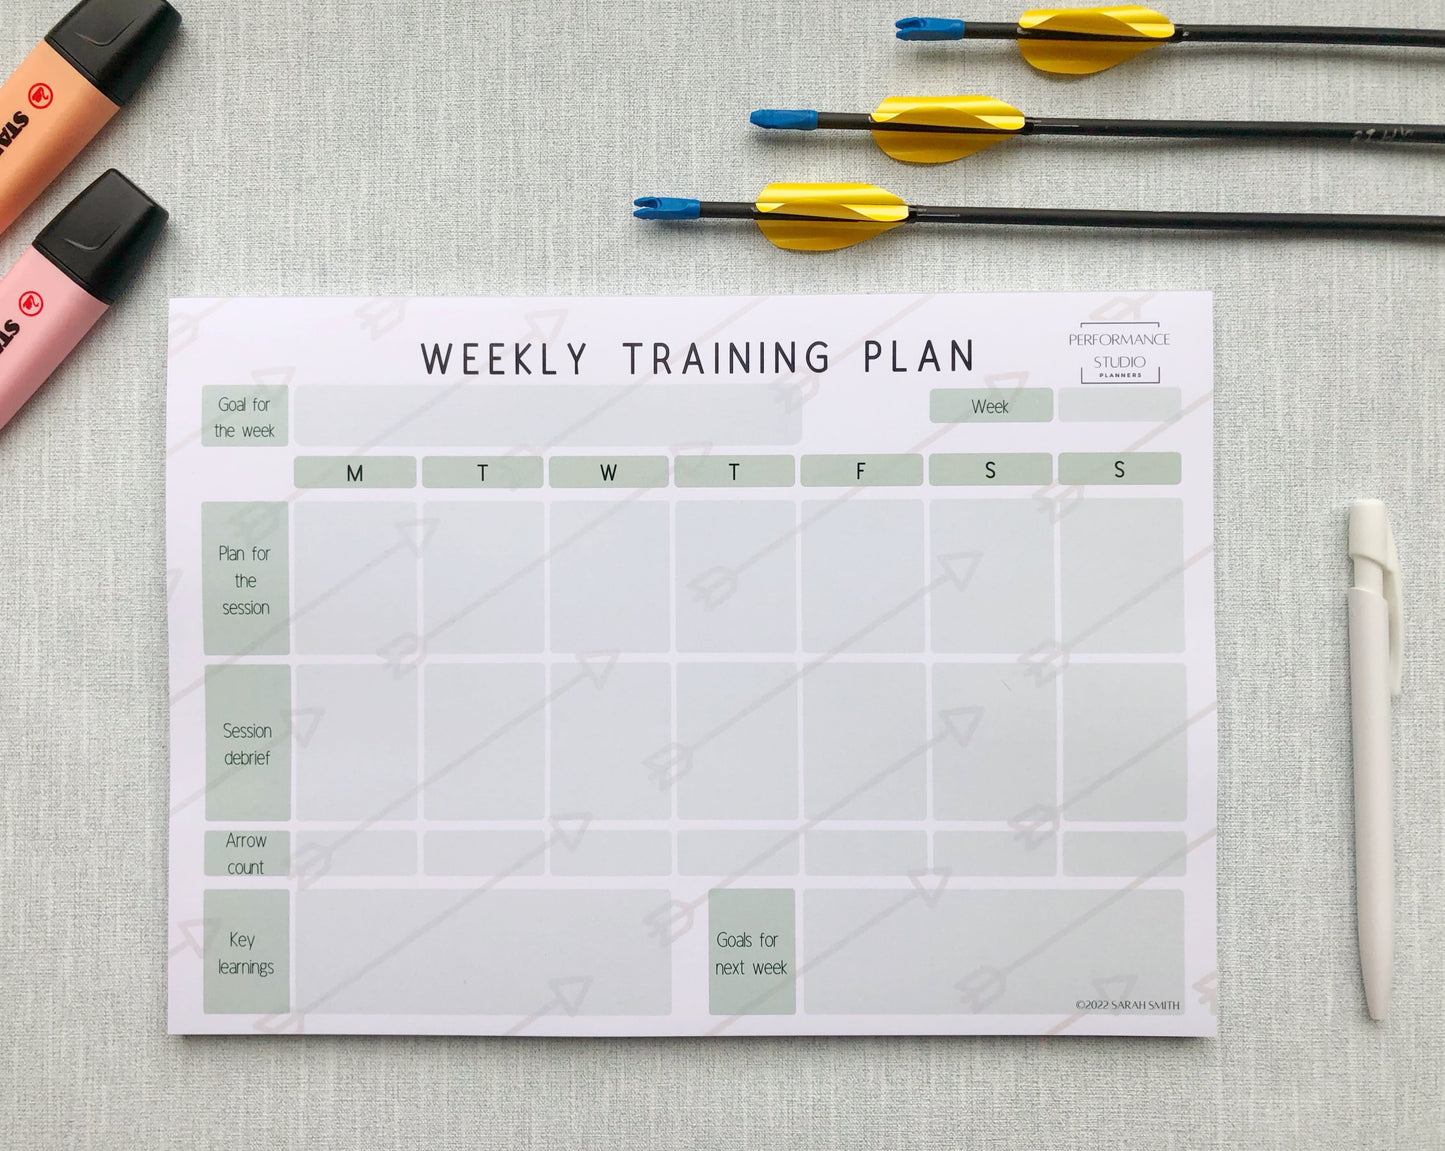 Green themed archery weekly planner. With different sections titled, goal for the week, plan for the session, session debrief, arrow count, key learnings, and goal for next week.